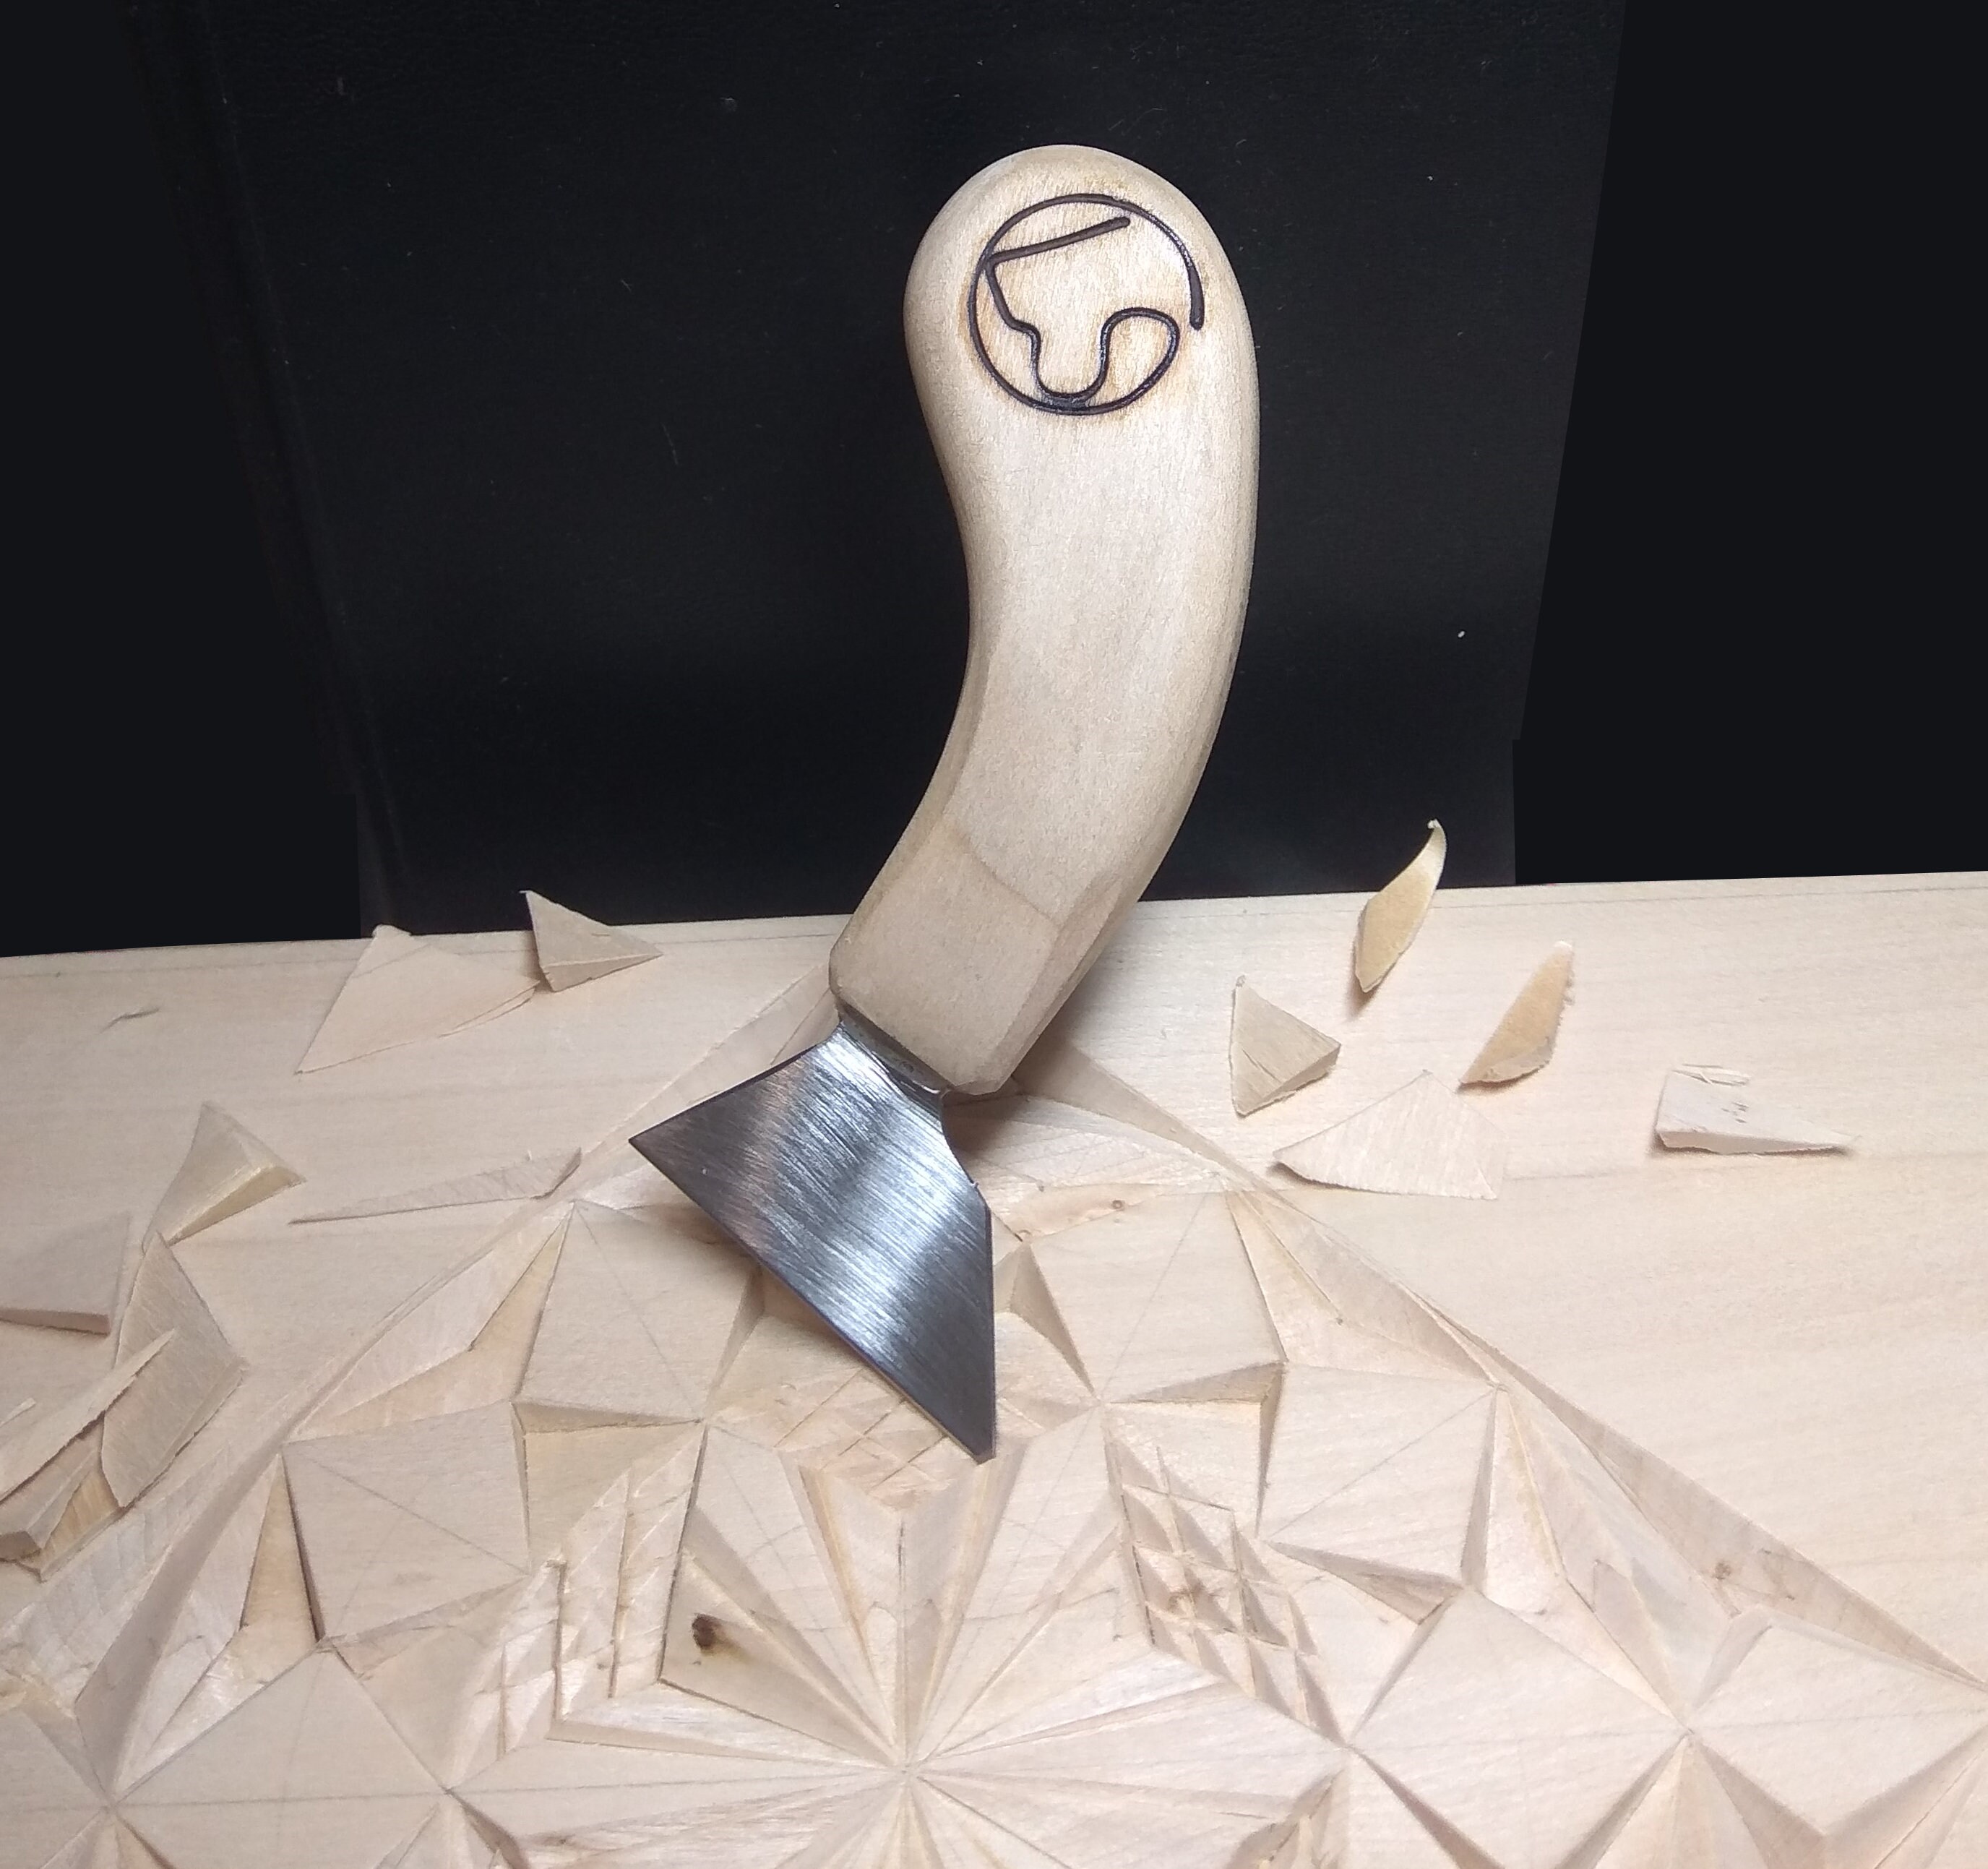 There is a link to the video lesson. Wood carving tools